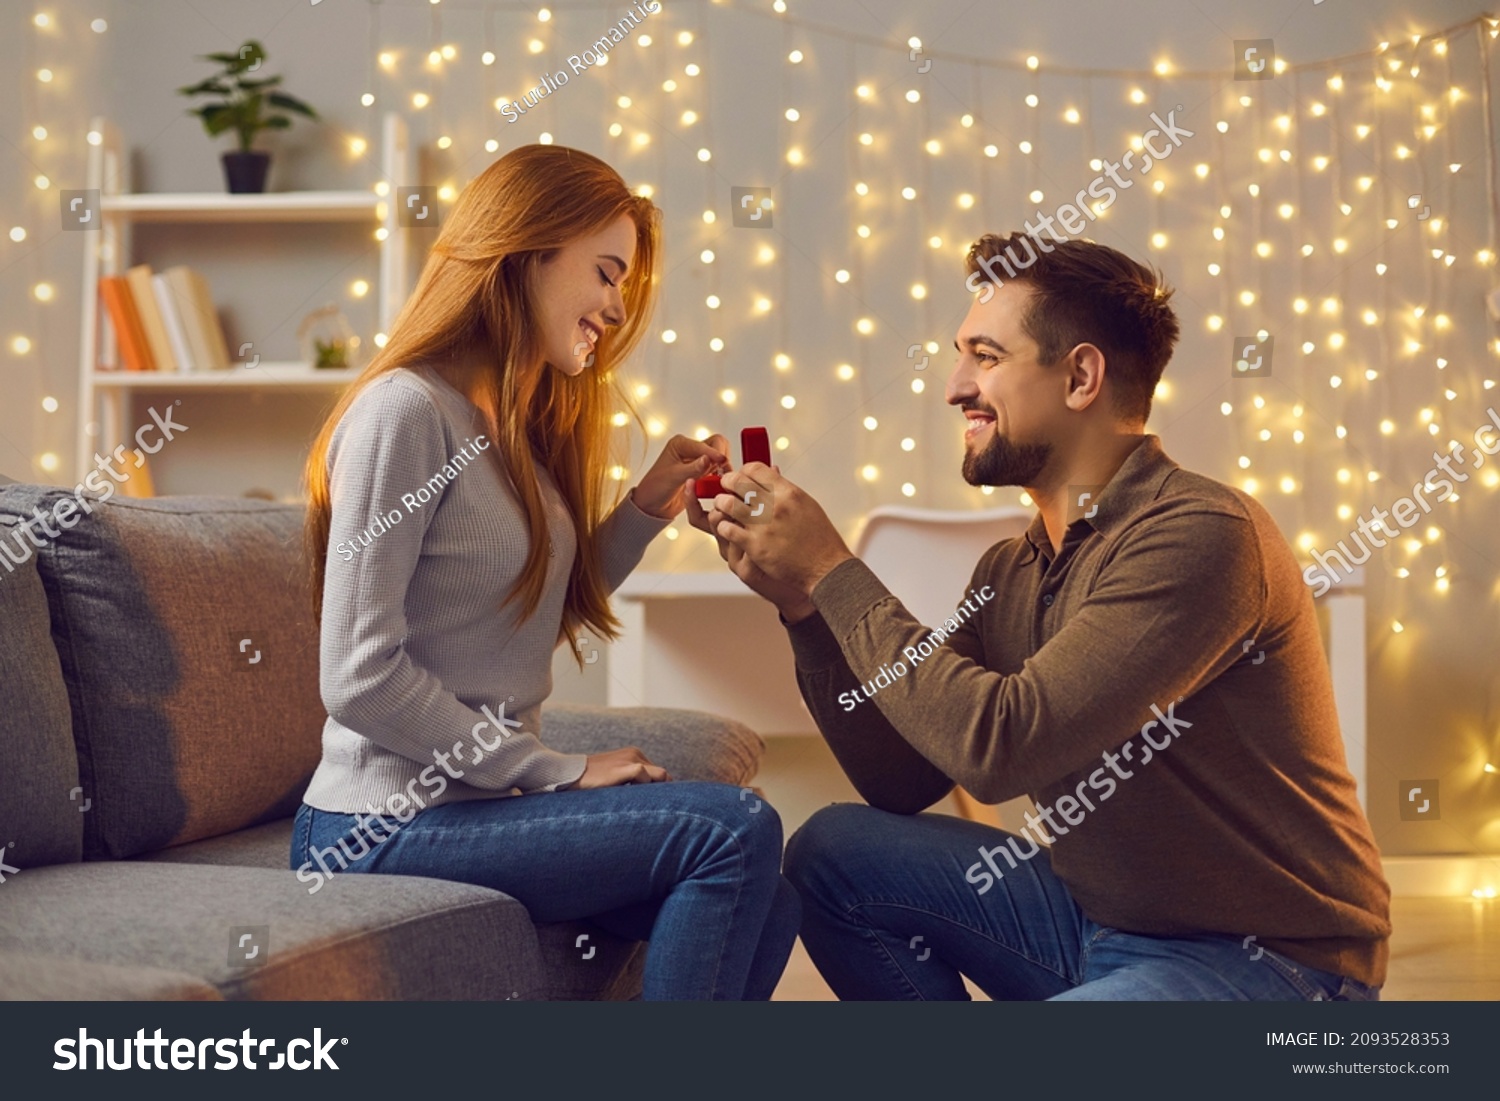 Will you marry me. Couple making love promise to each other on cozy evening at home. Happy woman getting romantic marriage proposal. Young man proposing to girlfriend and giving her engagement ring #2093528353